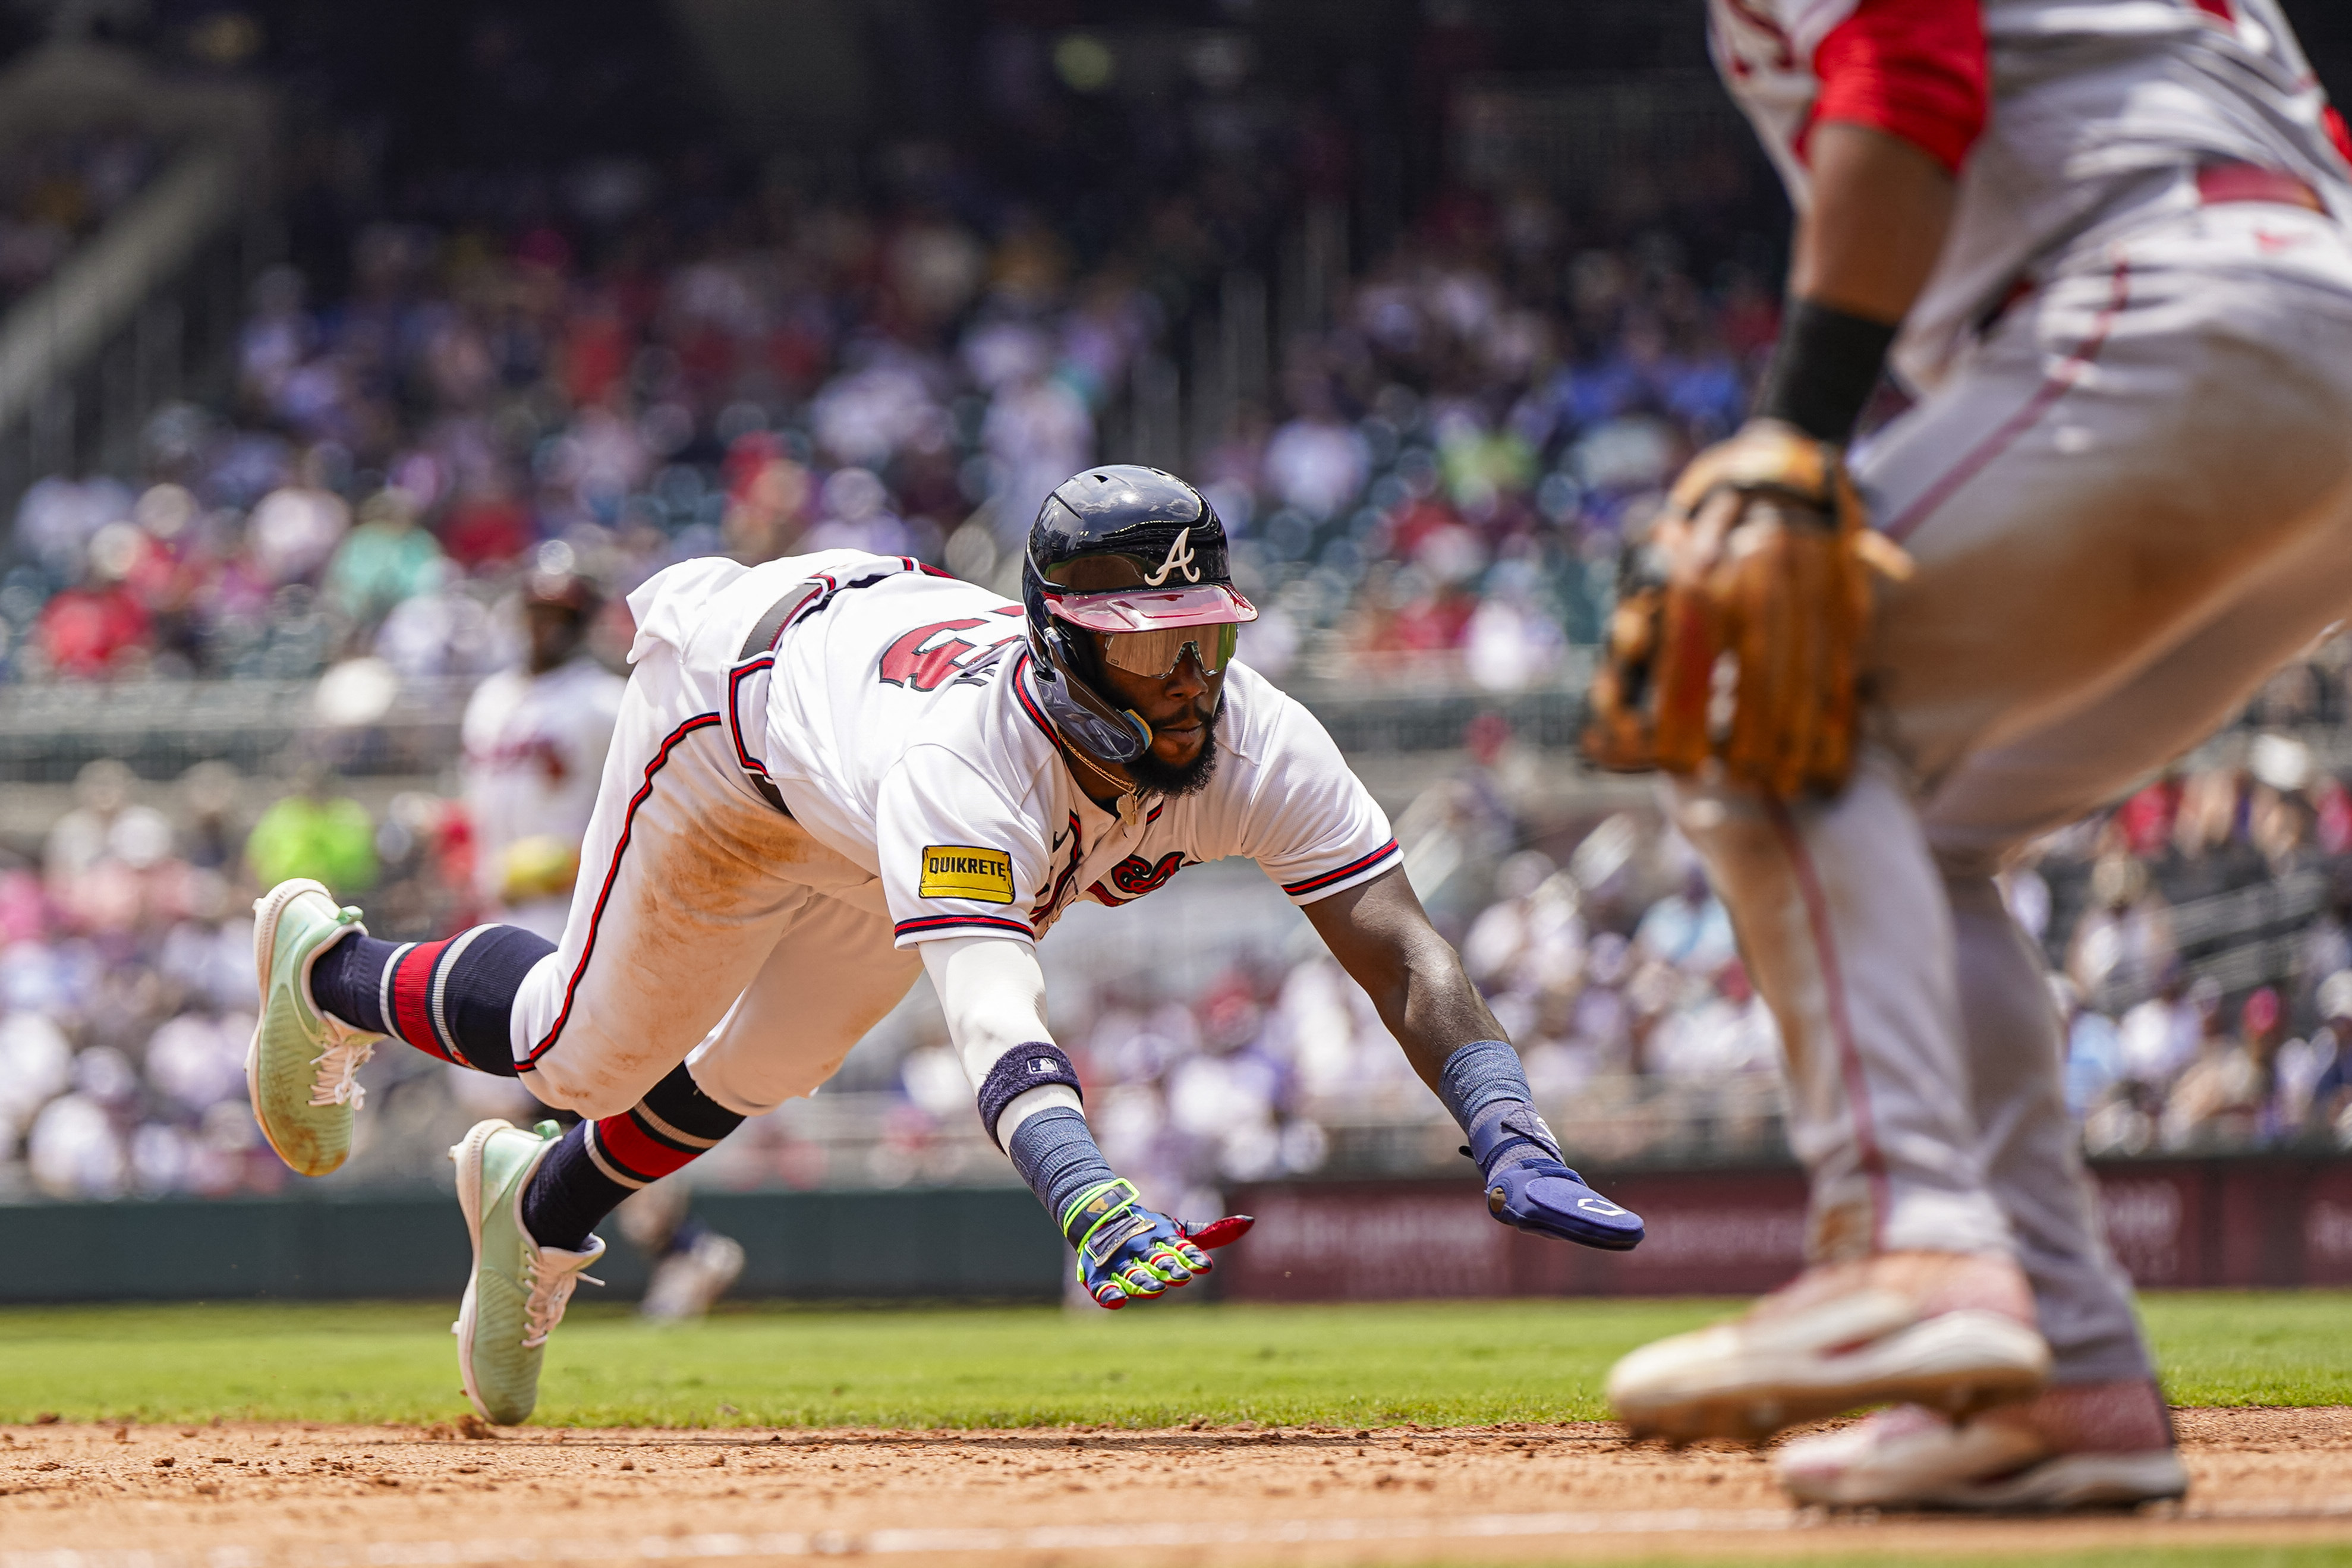 O'Neill's 3-run HR in 8th Lifts Cardinals Over Braves 6-3 - Bloomberg